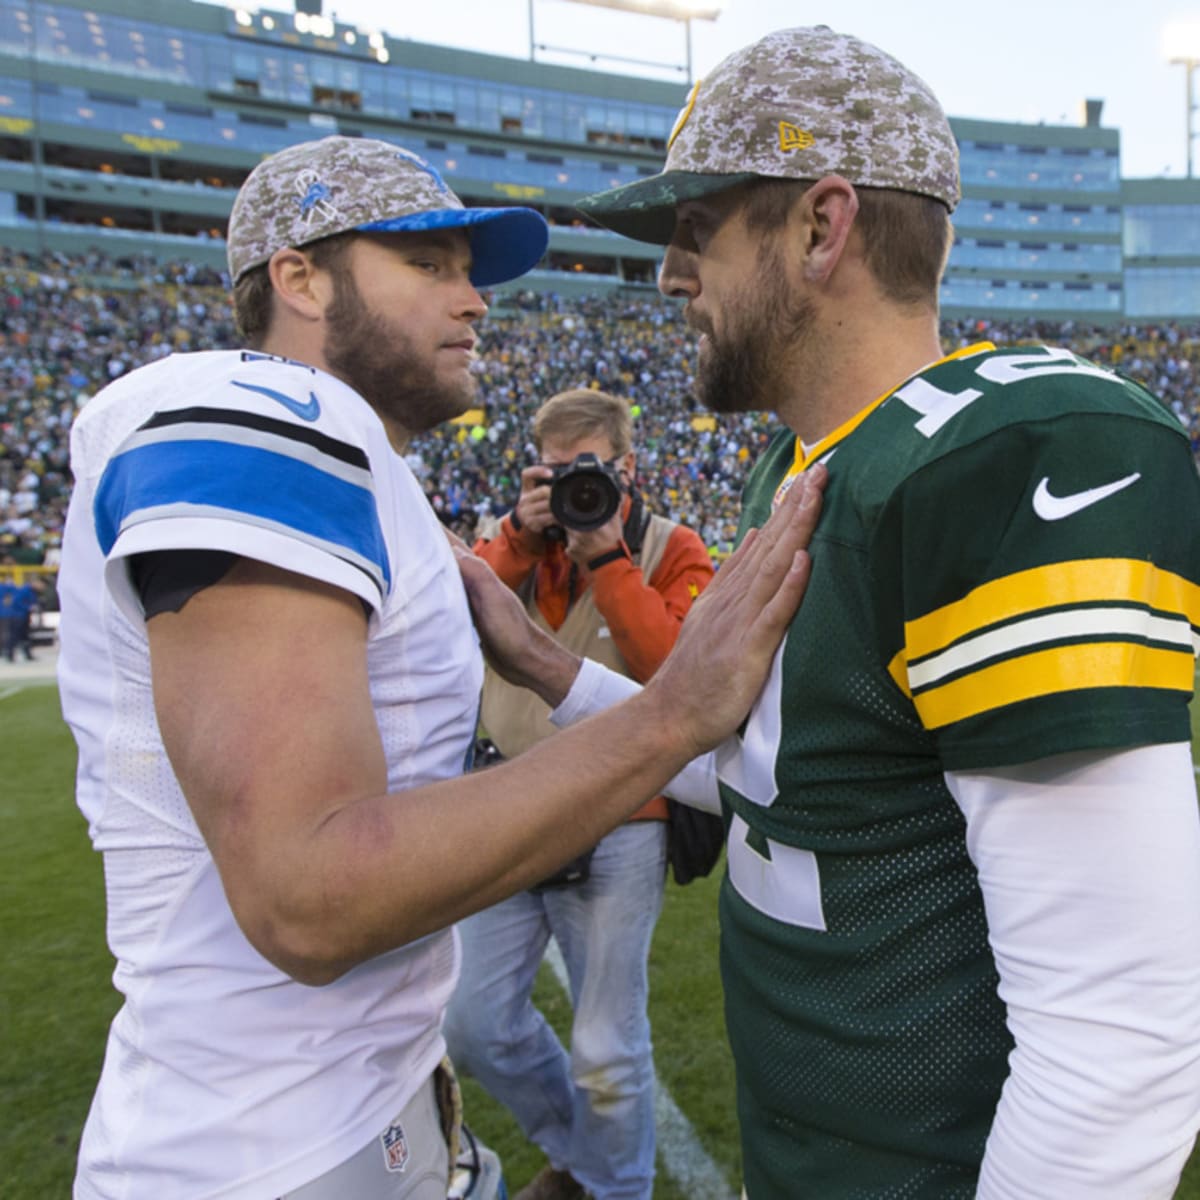 Matthew Stafford humbled by Lions fans wearing his jersey Sunday